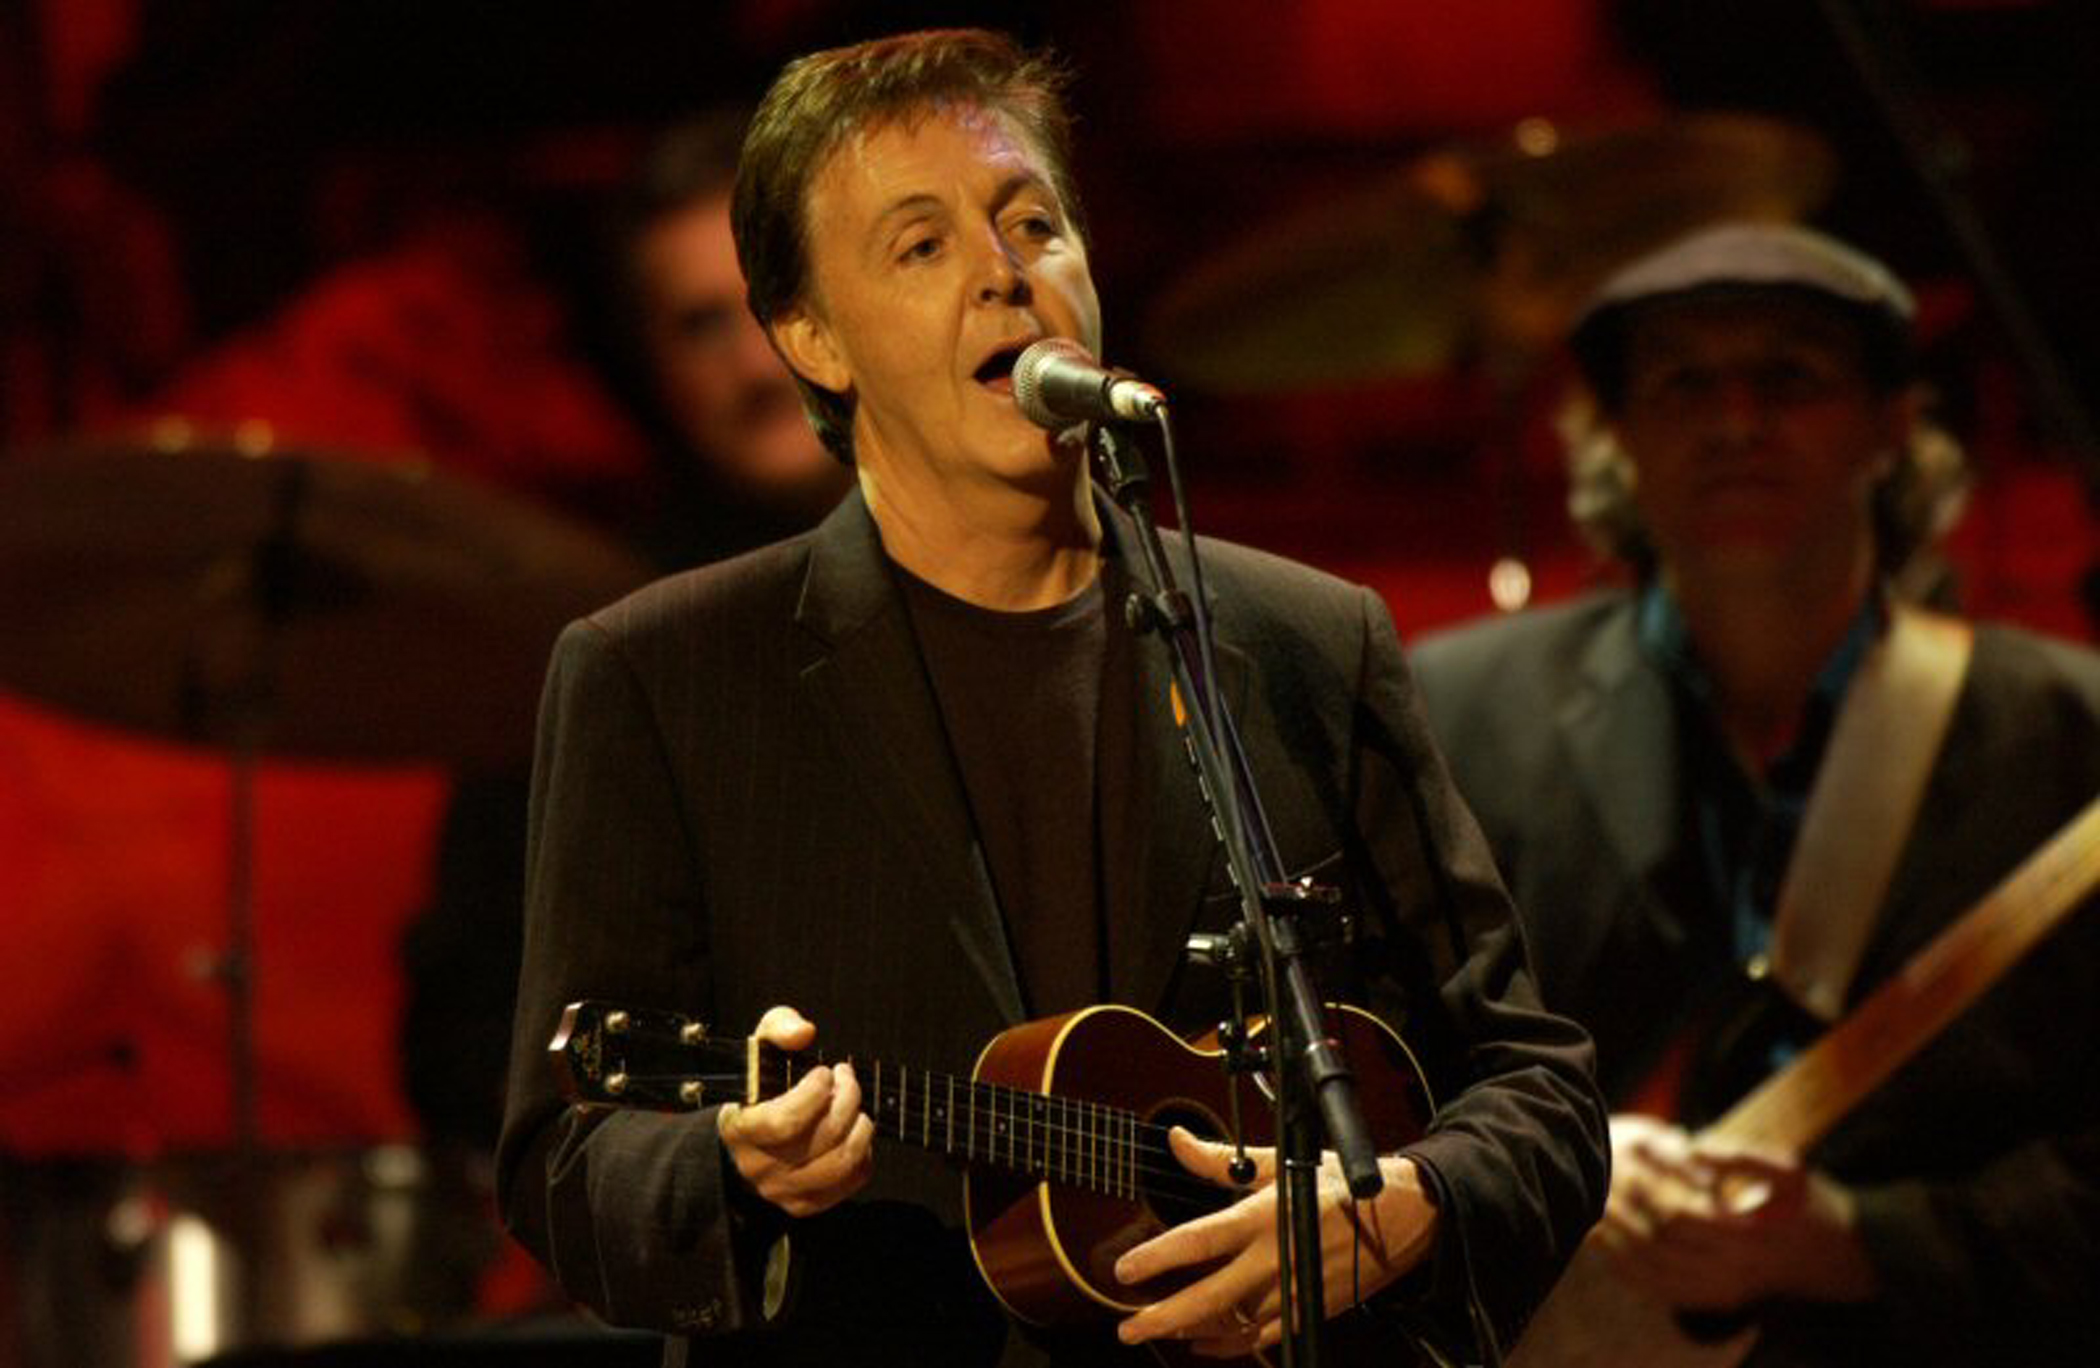 Paul McCartney performs at a concert on January 25, 2023 | Source: Getty Images